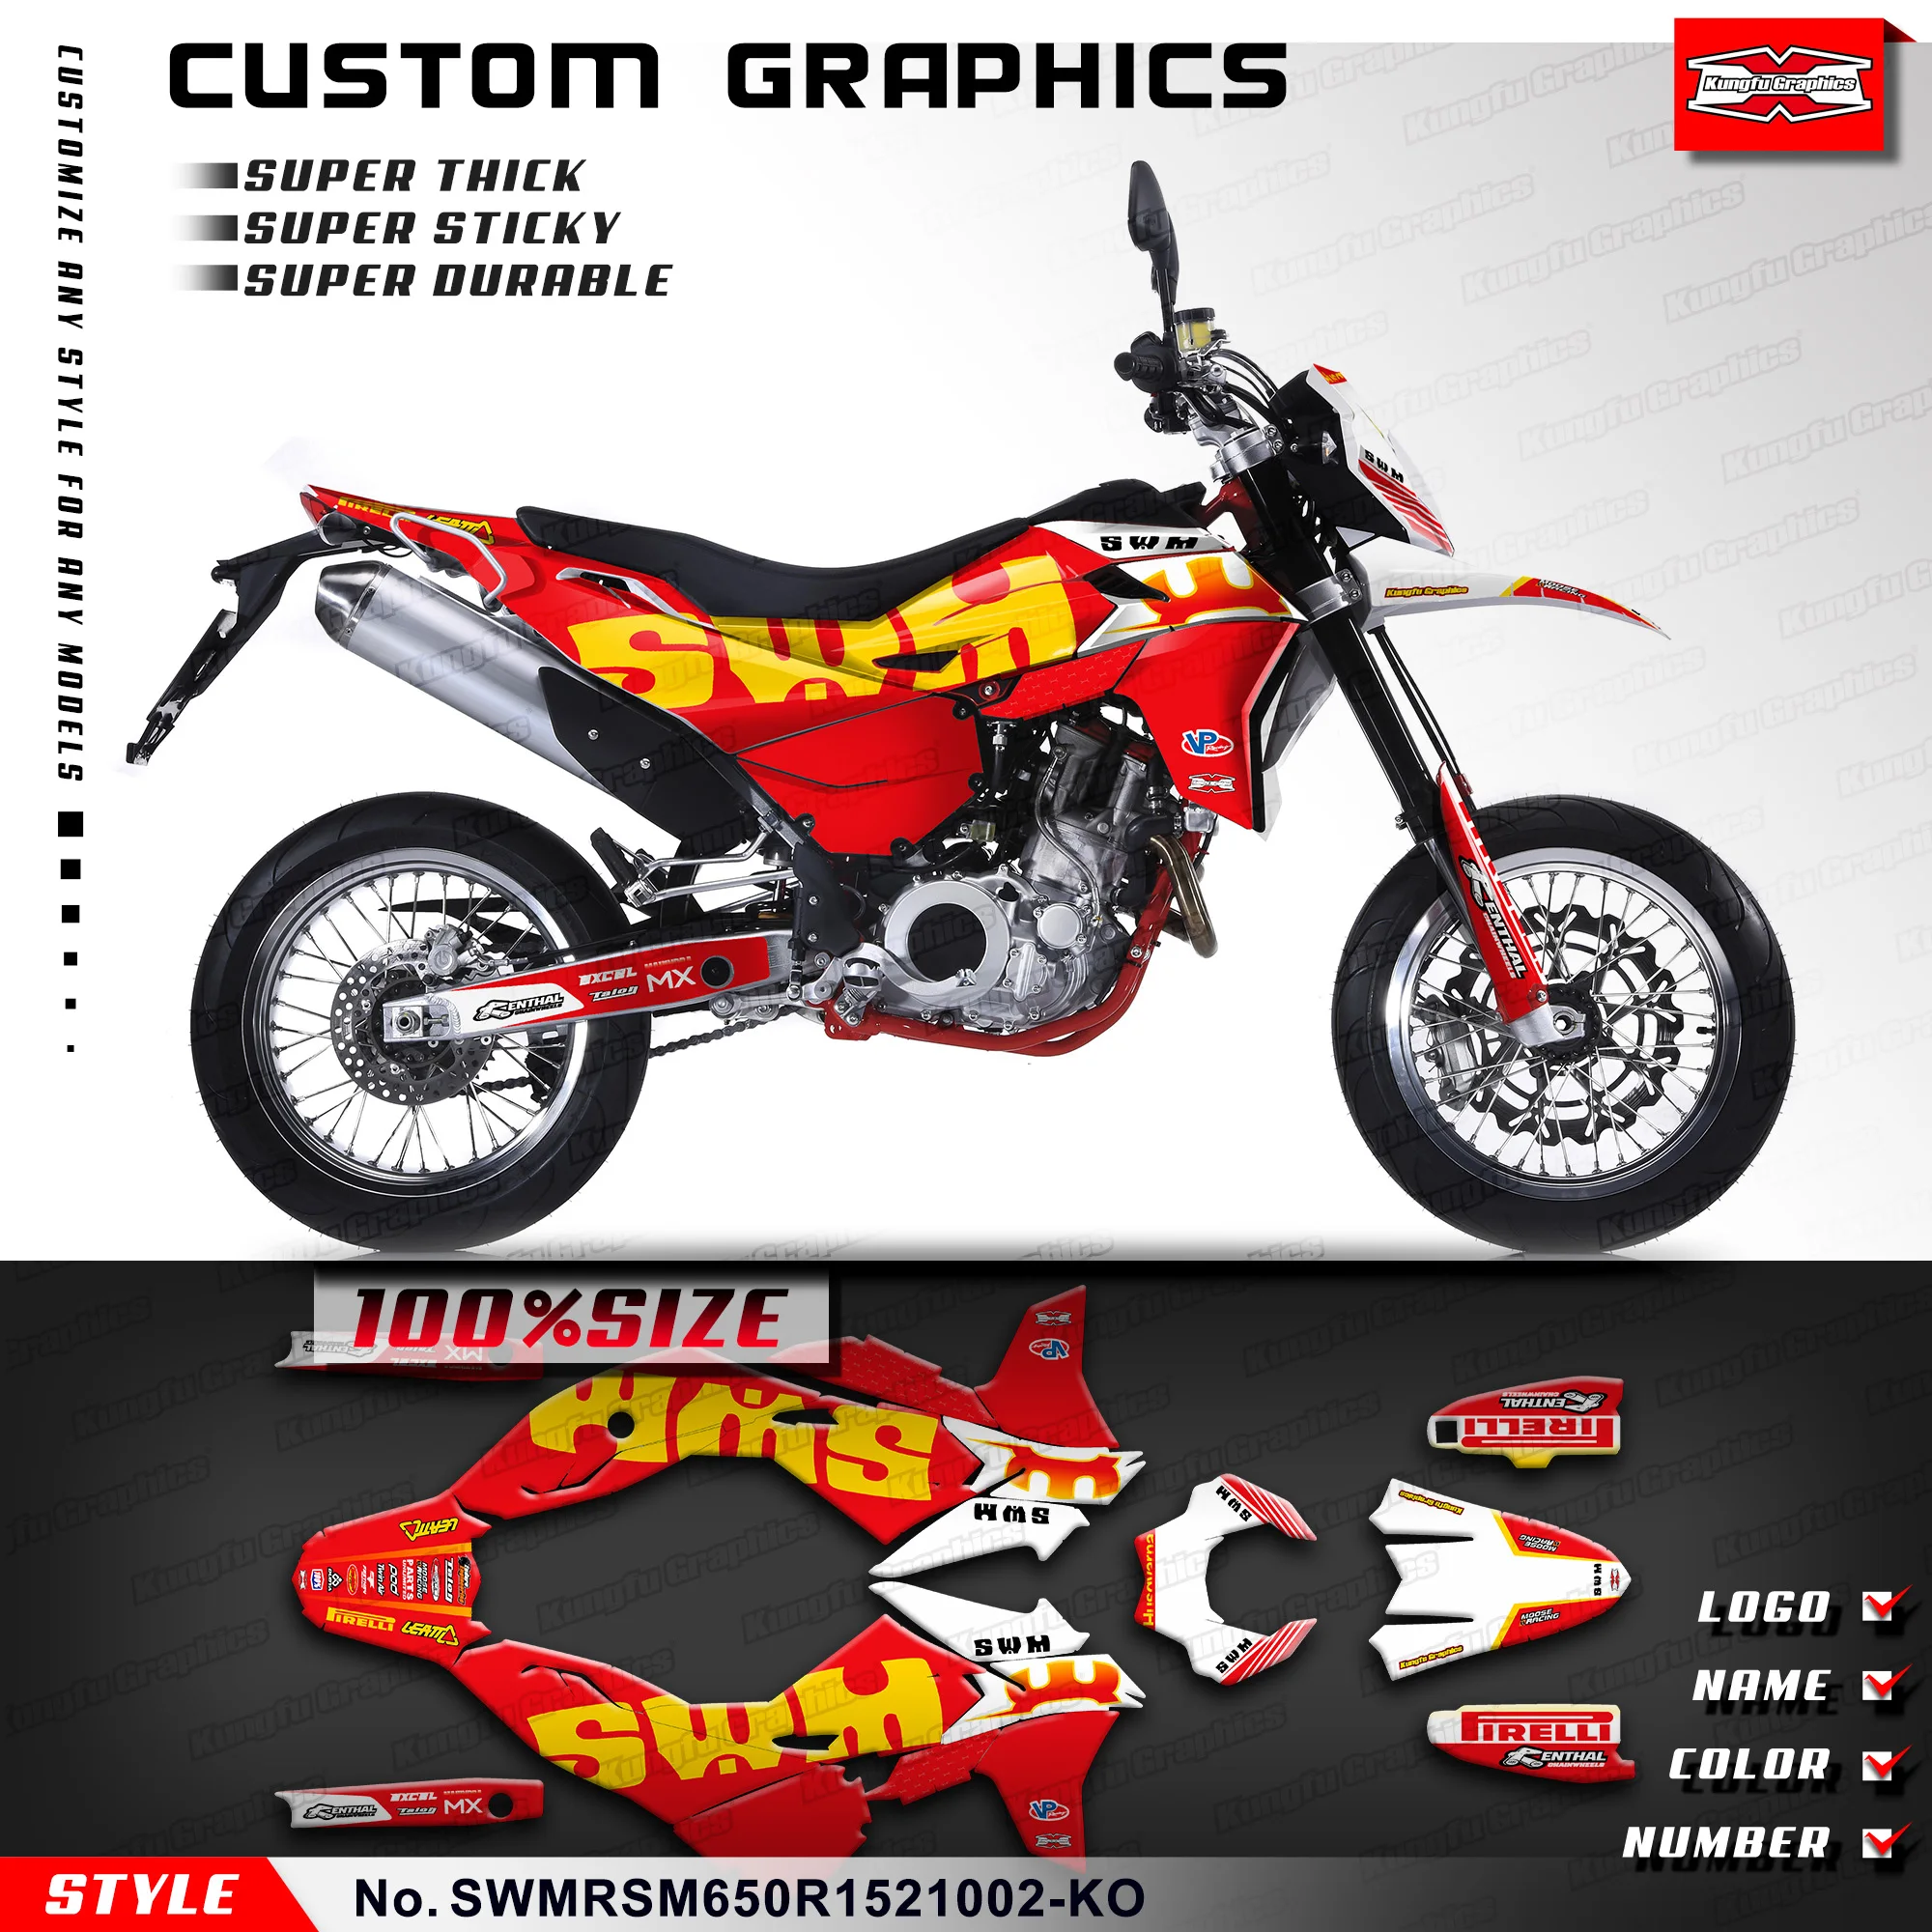 

KUNGFU GRAPHICS Custom Stickers Full Decals Kit for SWM SM650R RS650R 2015 2016 2017 2018 2019 2020 2021, SWMRSM650R1521002-KO